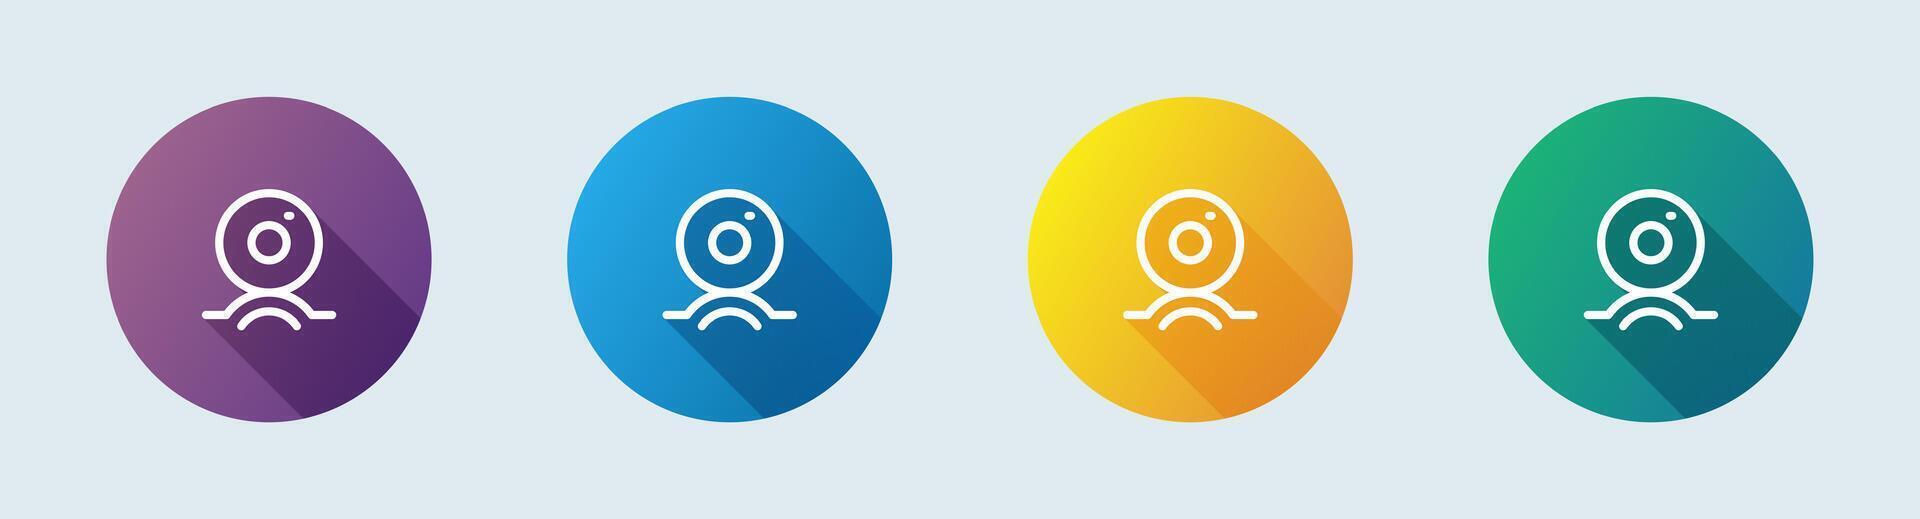 Webcam line icon in flat design style. Camera signs vector illustration.